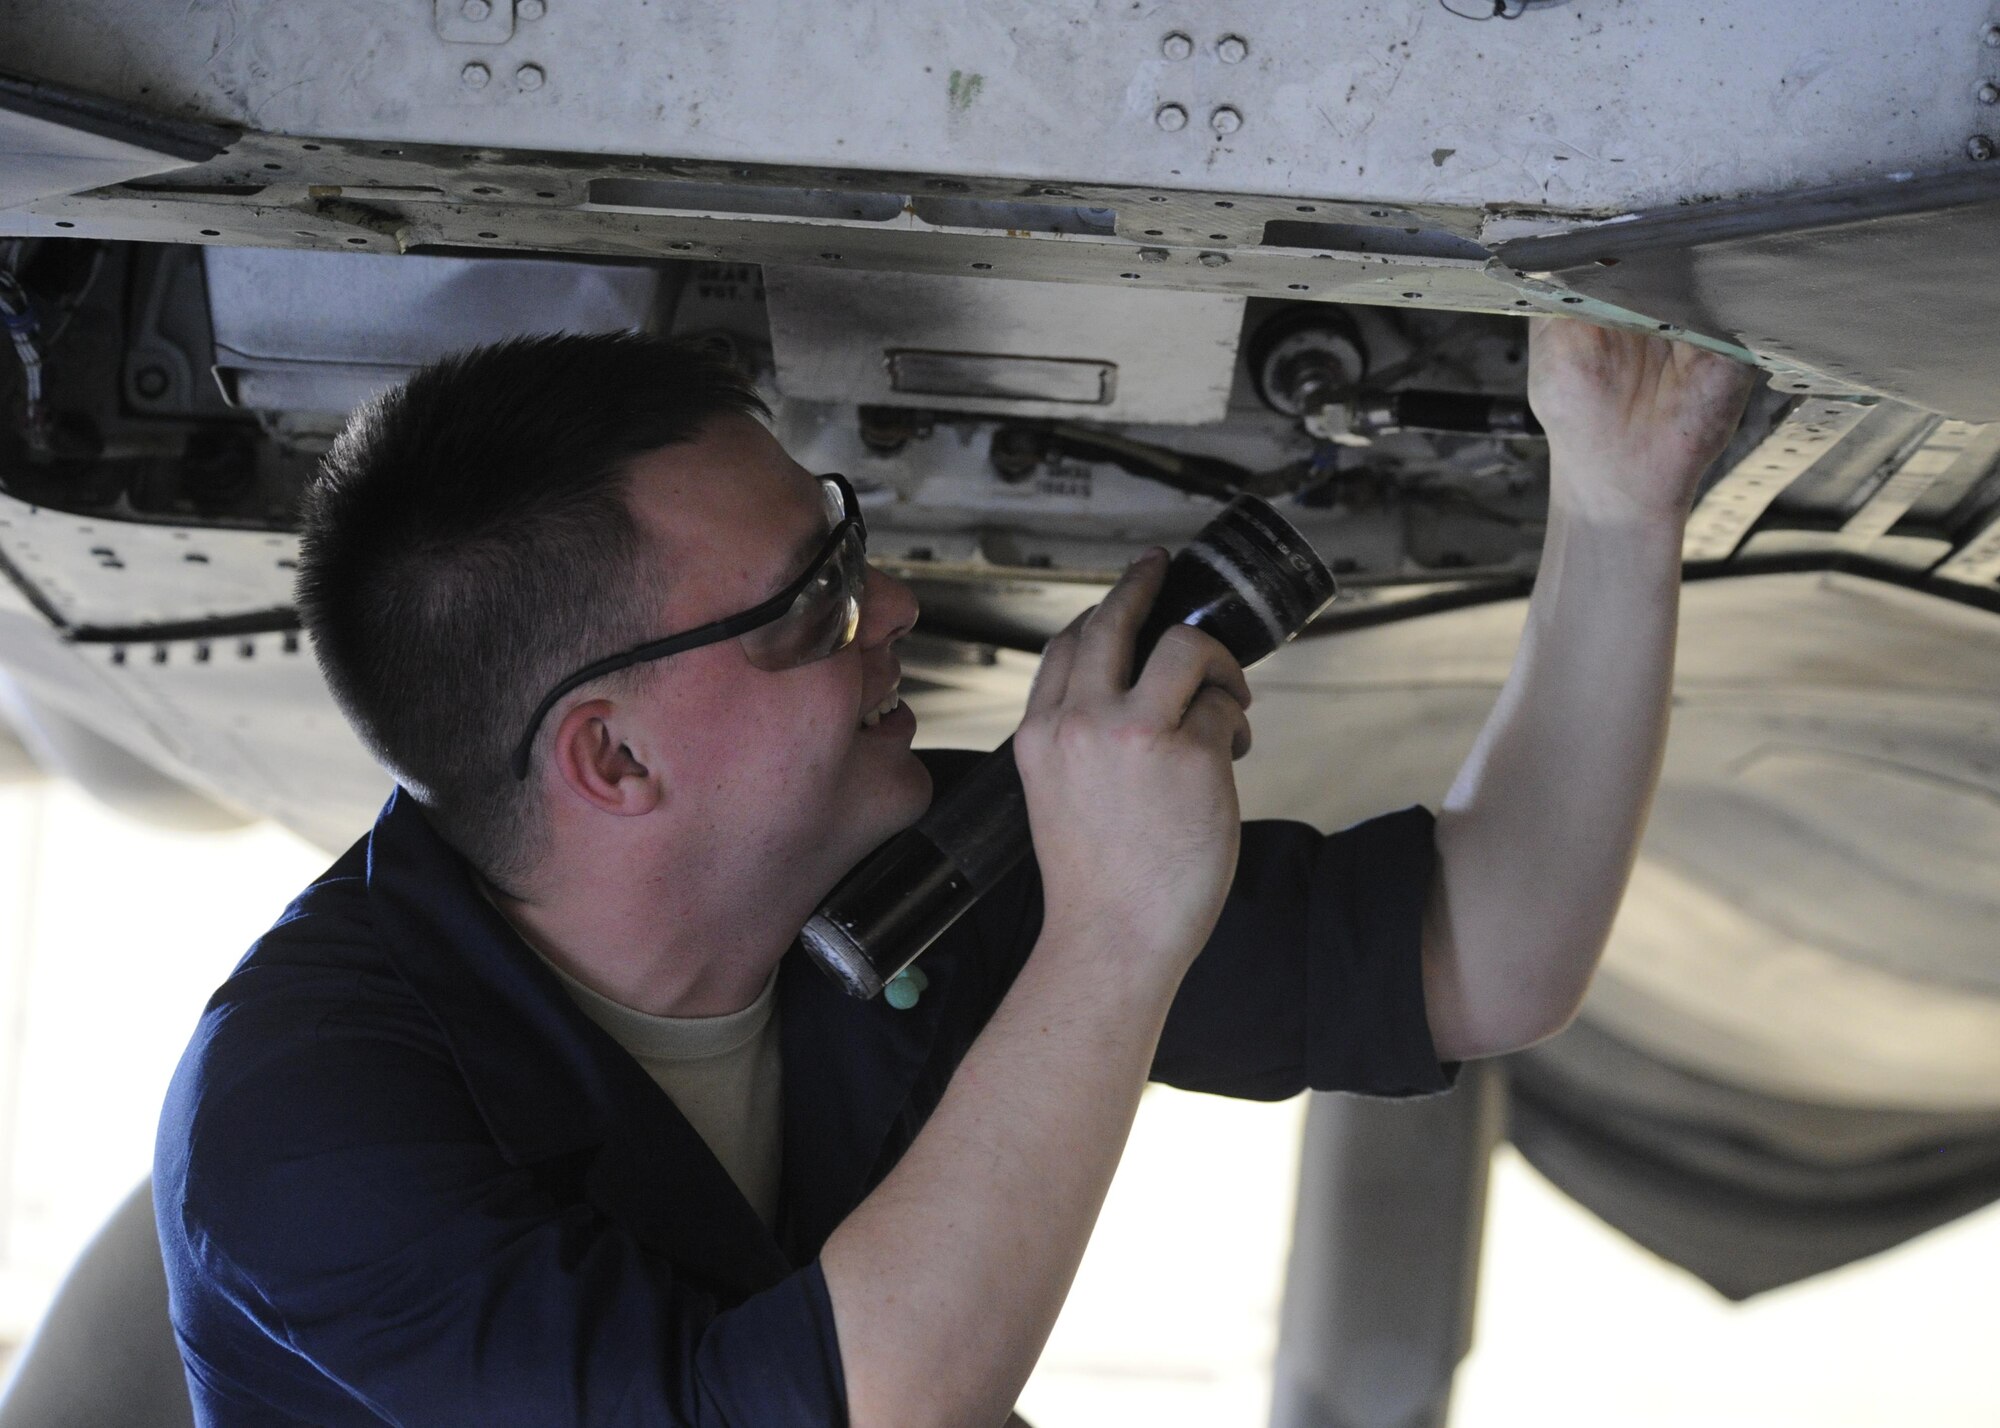 Senior Airman Jackson Findley, 325th Maintenance Squadron package maintenance plans technician, inspects the F-22 Raptor aircraft mounted assisted drive, March 28, 2016, in Hangar 2. Package maintenance plans technicians like Findley are charged with checking F-22s AMADs for any defects or wear and tear. (U.S. Air Force photo by Senior Airman Solomon Cook/Released)